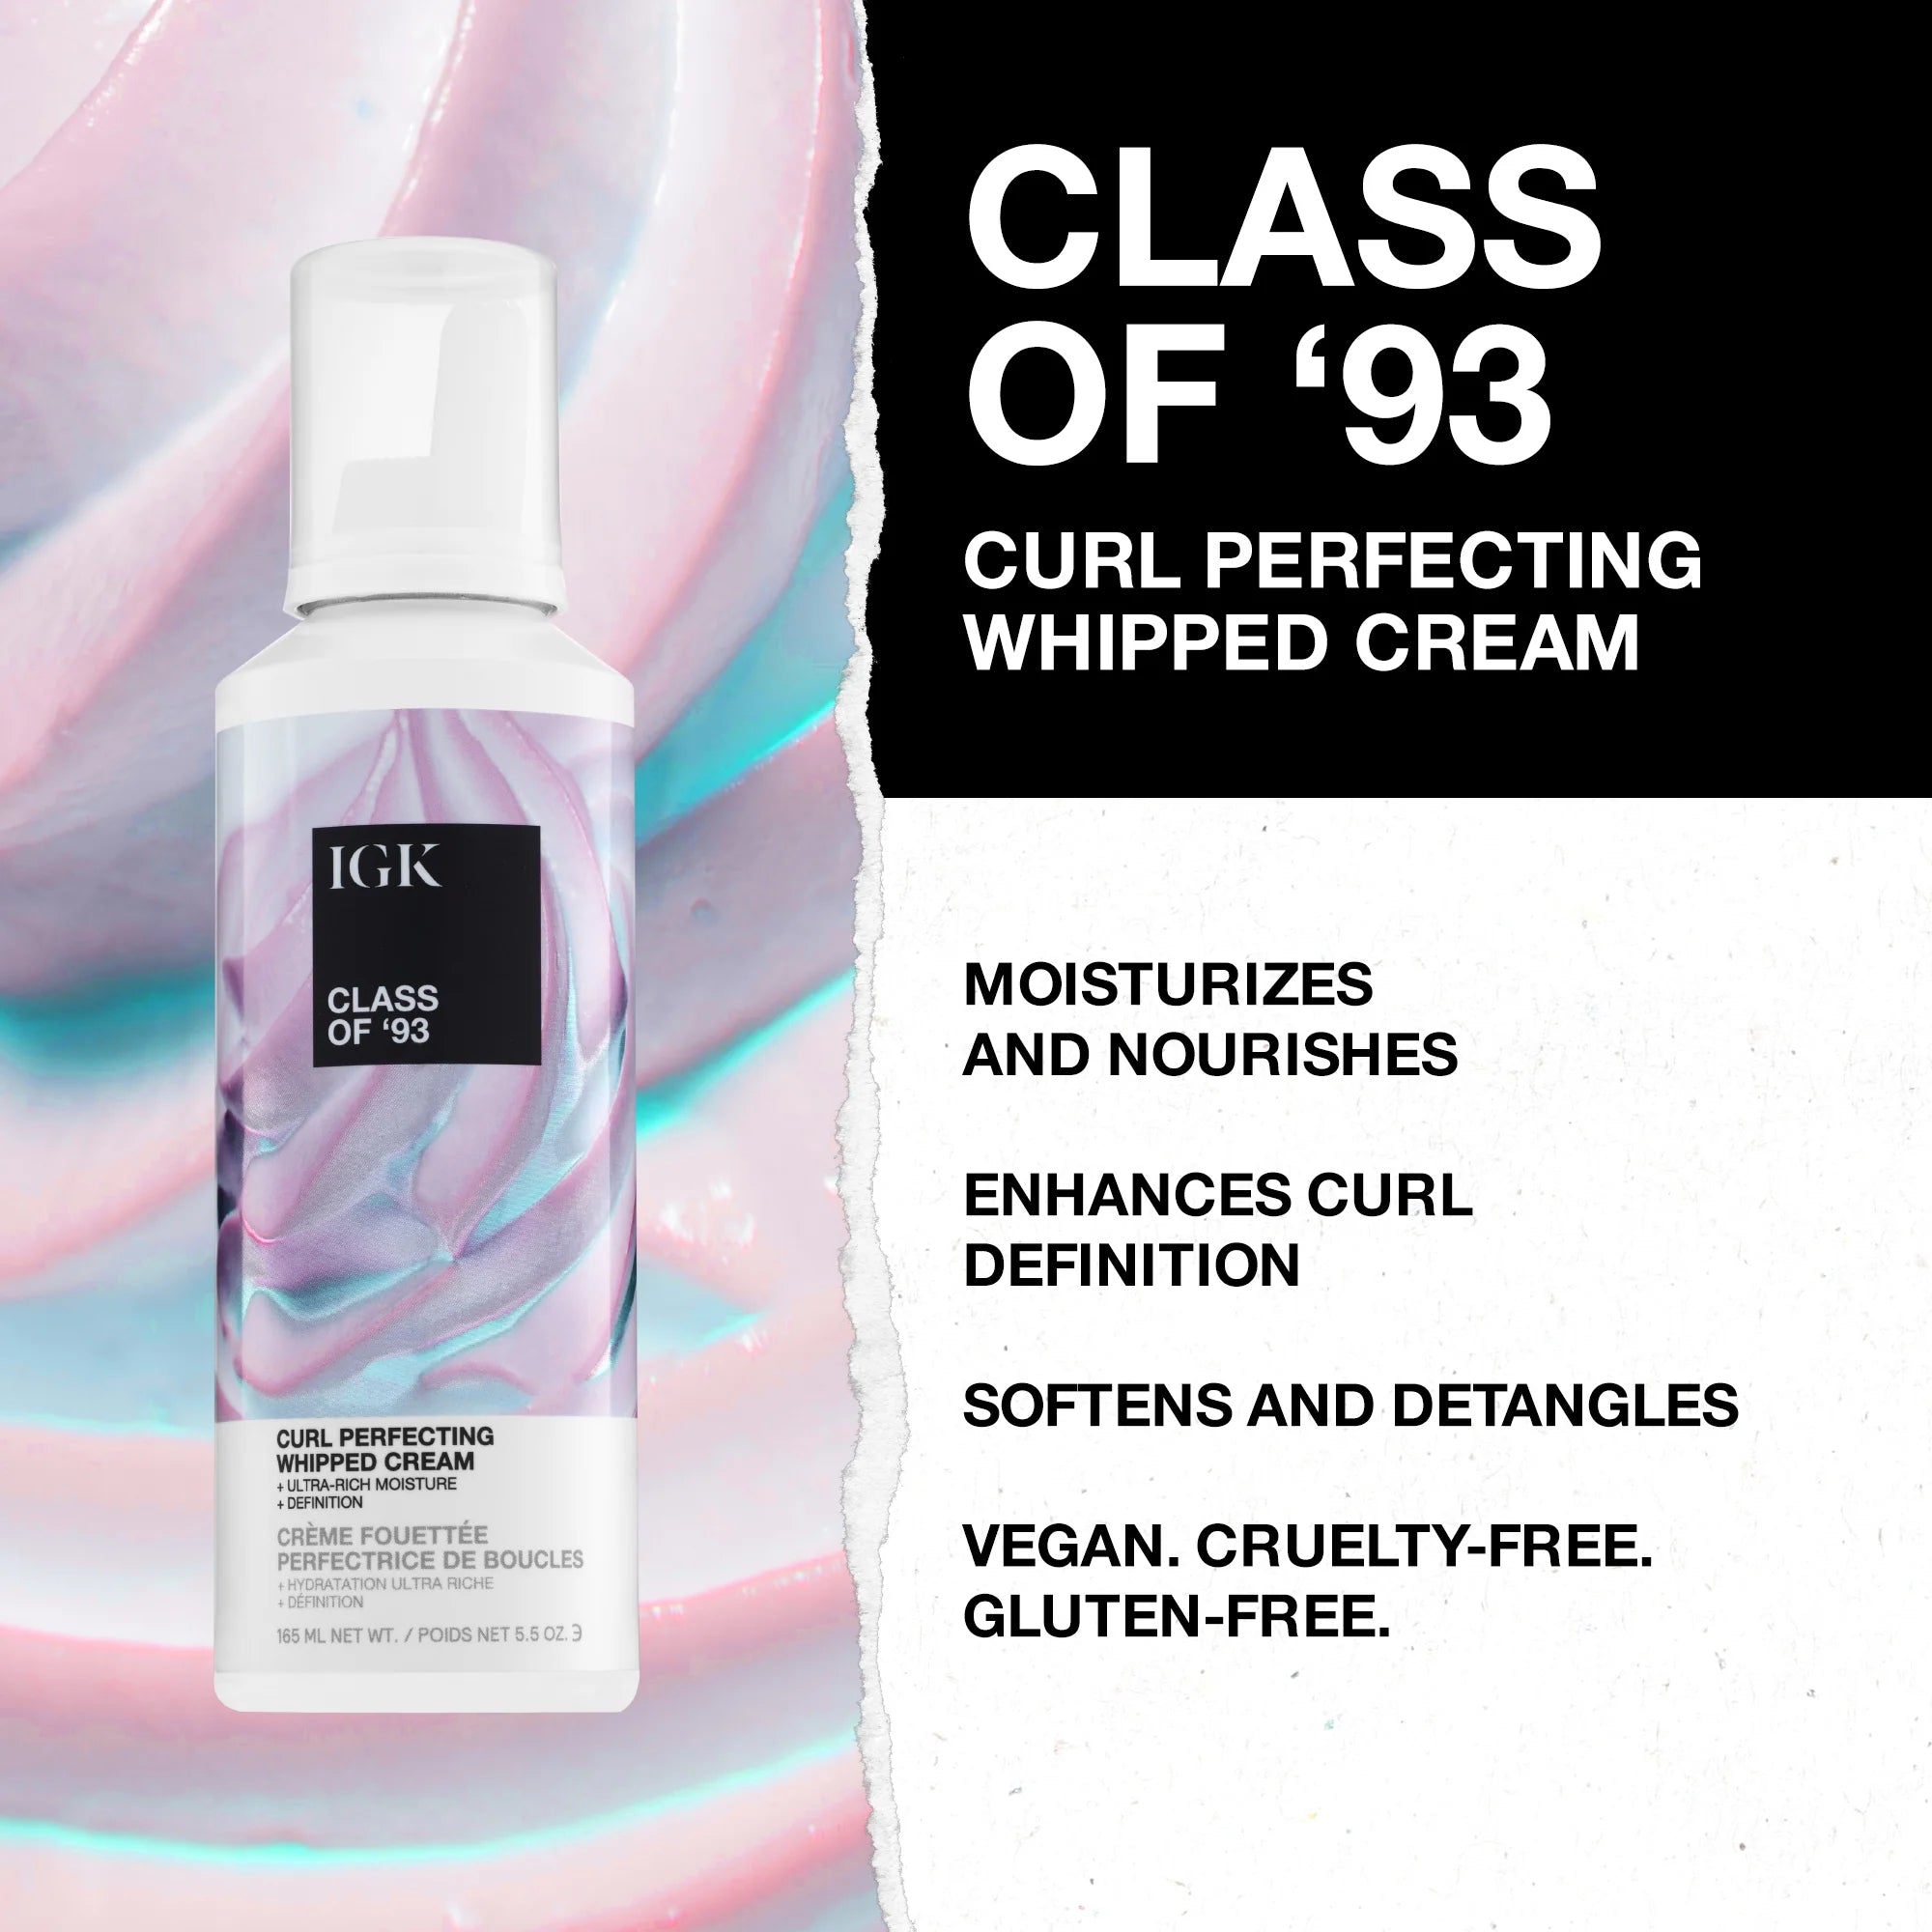 IGK Class of ‘93 Curl Perfecting Whipped Cream